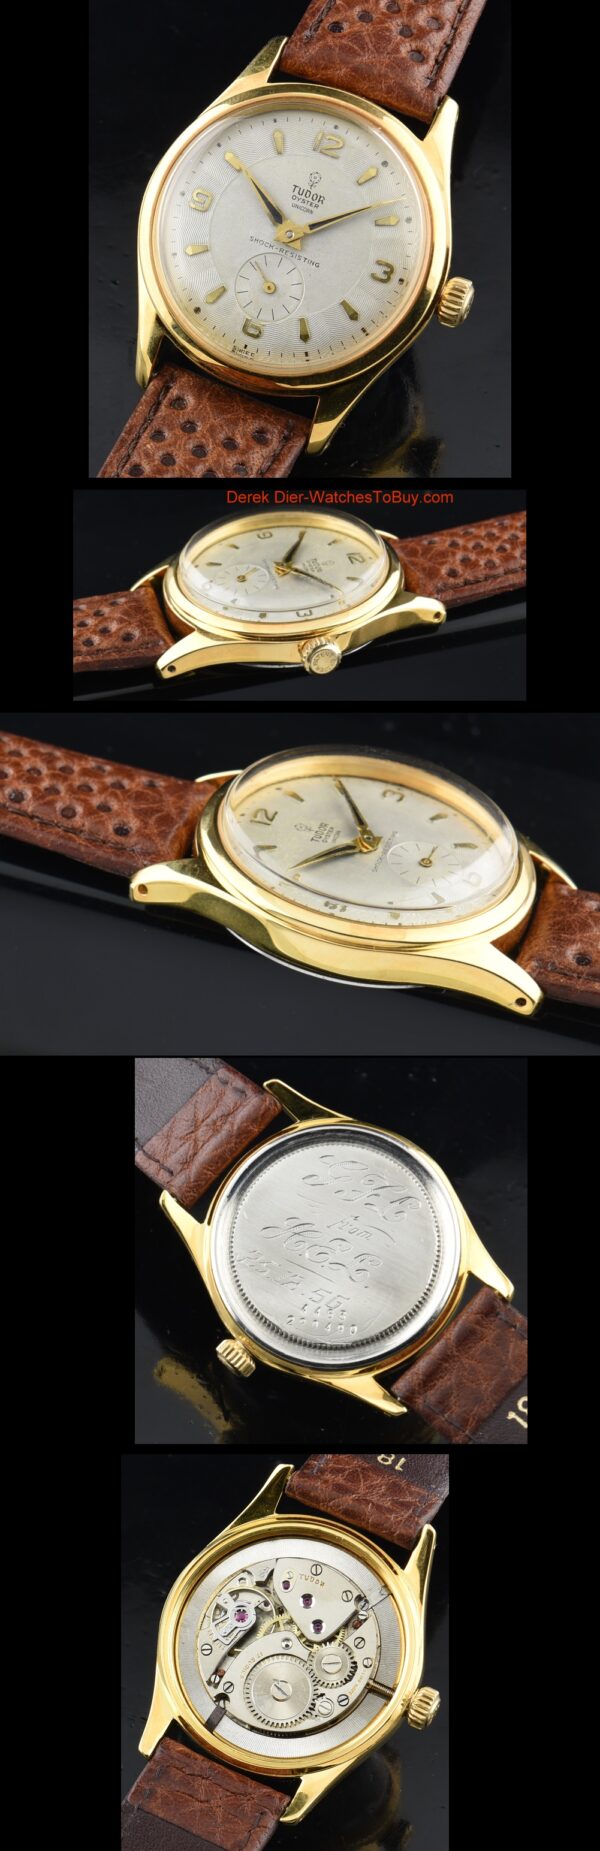 1956 Tudor 34mm Oyster Unicorn gold-plated watch with original dial, hands, case, patented crown, and cleaned, fine manual winding movement.